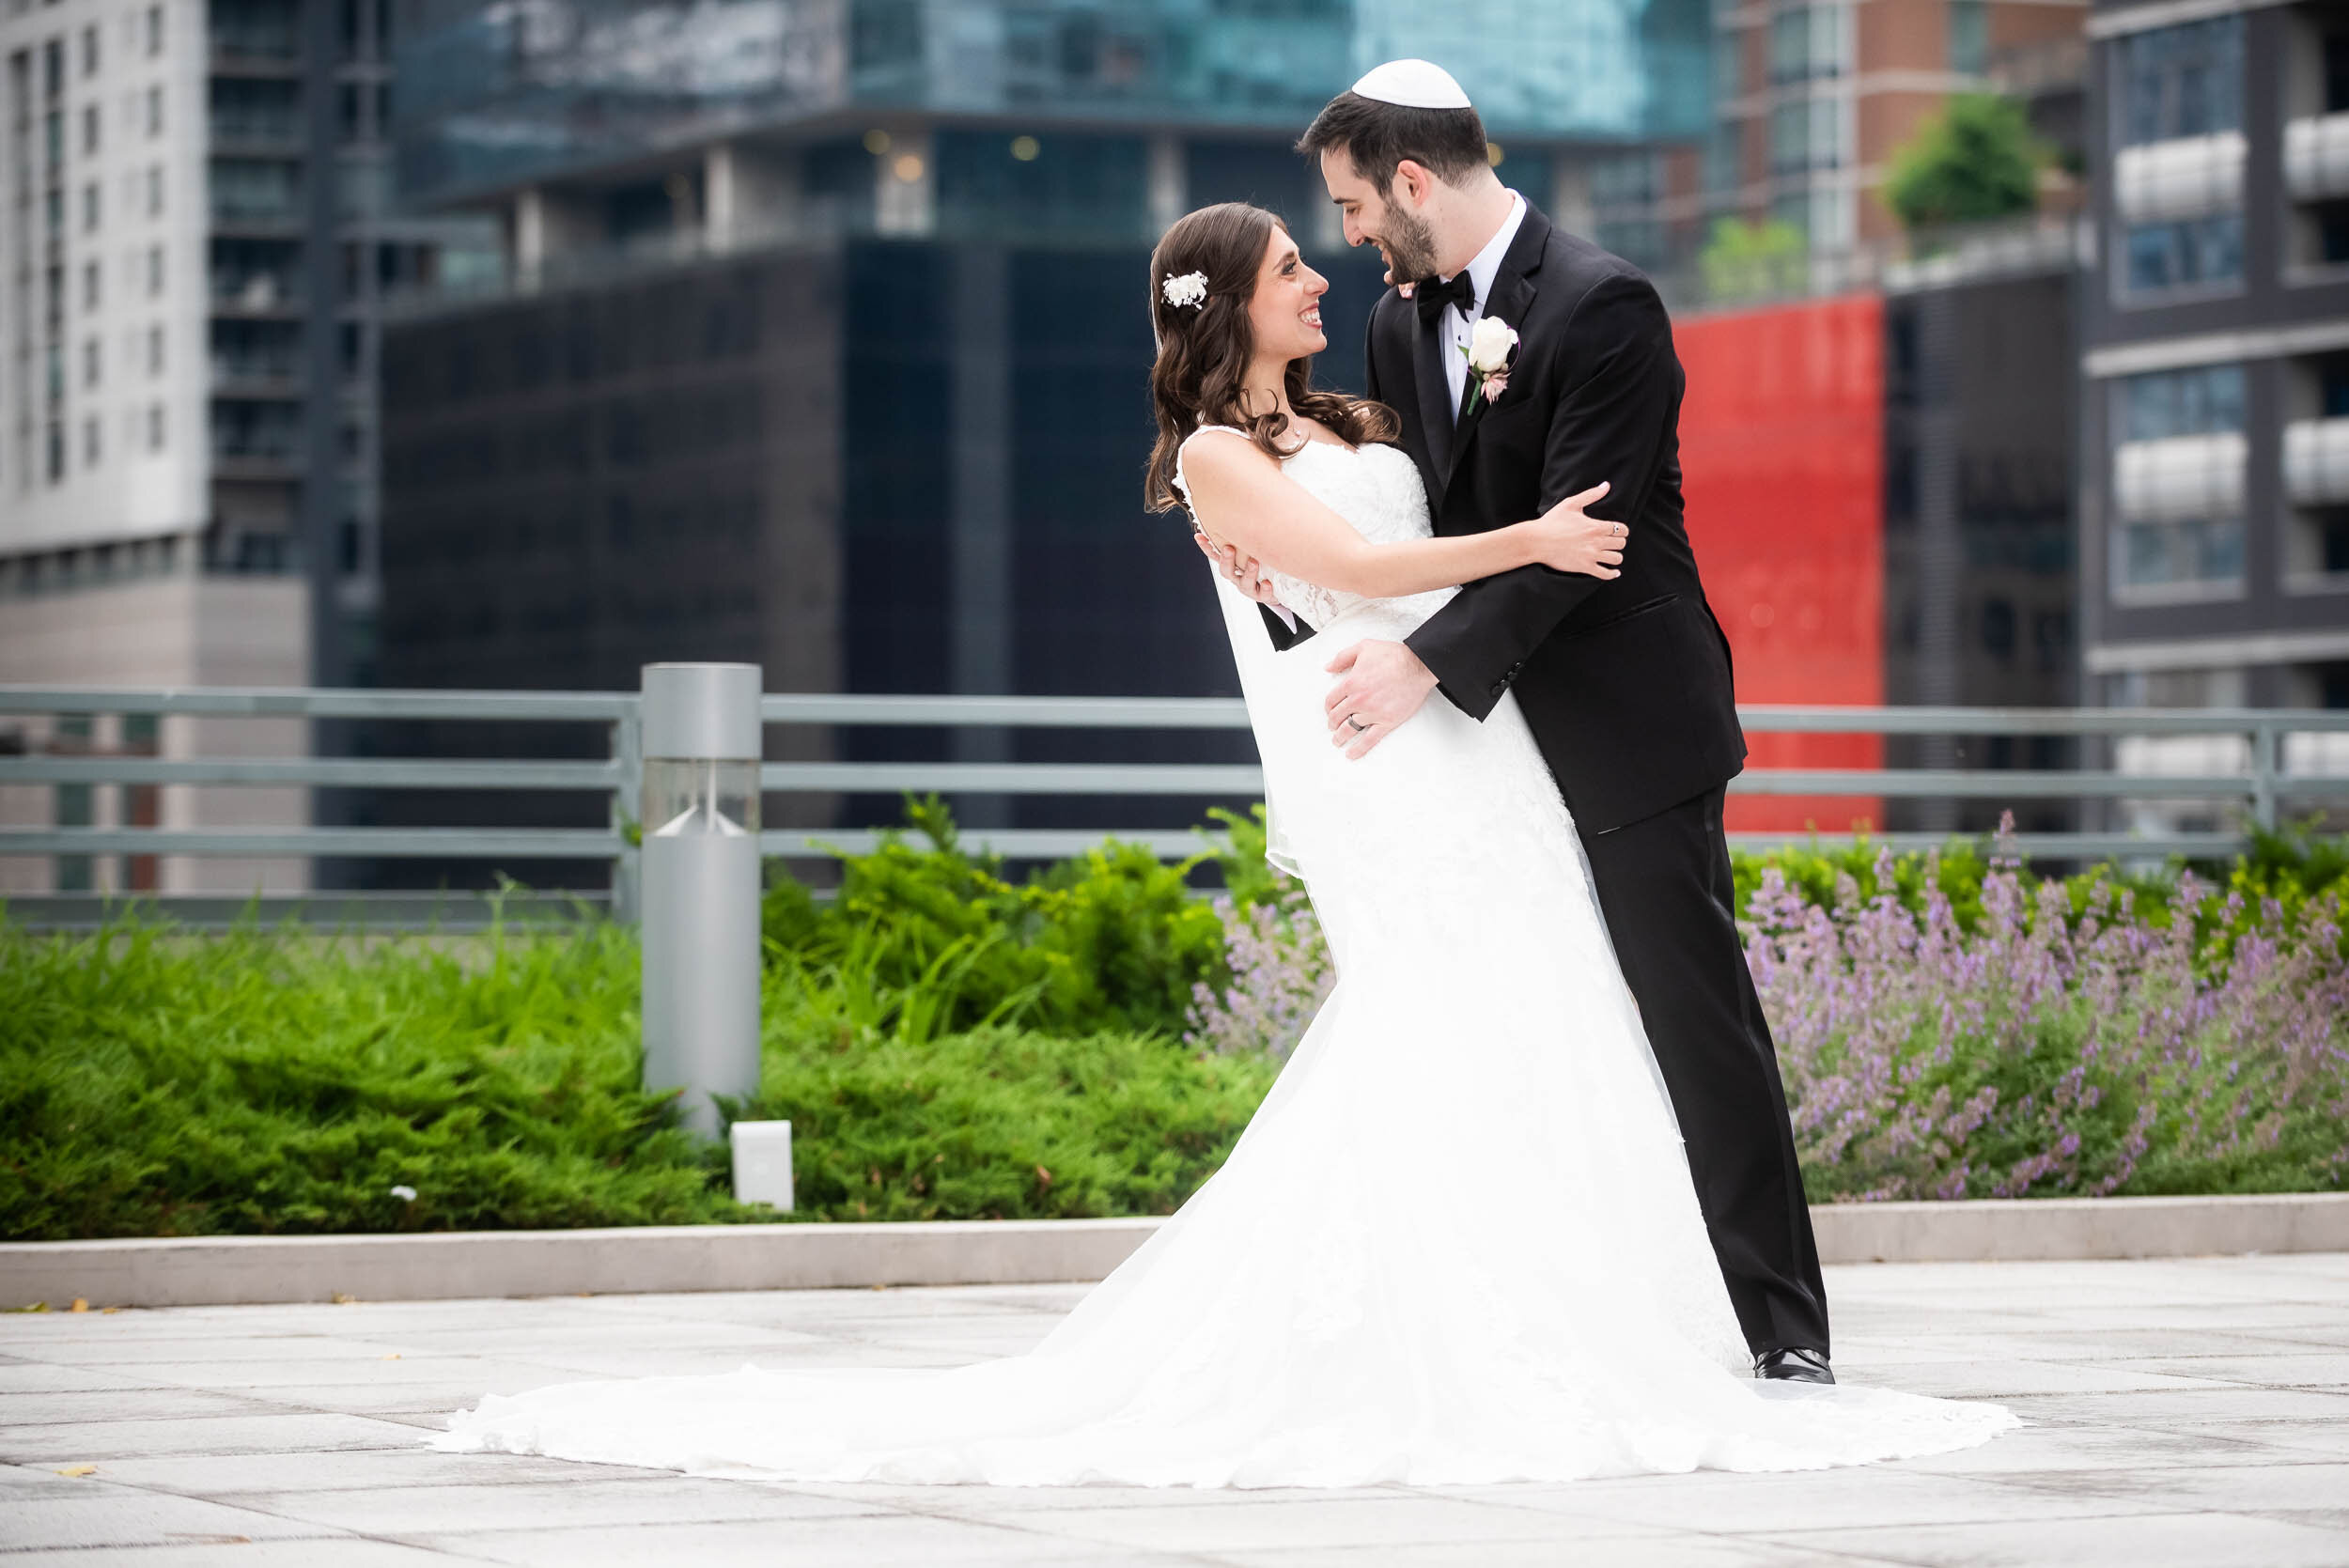 Outdoor terrace wedding photos: Loews Chicago Hotel Wedding captured by J. Brown Photography